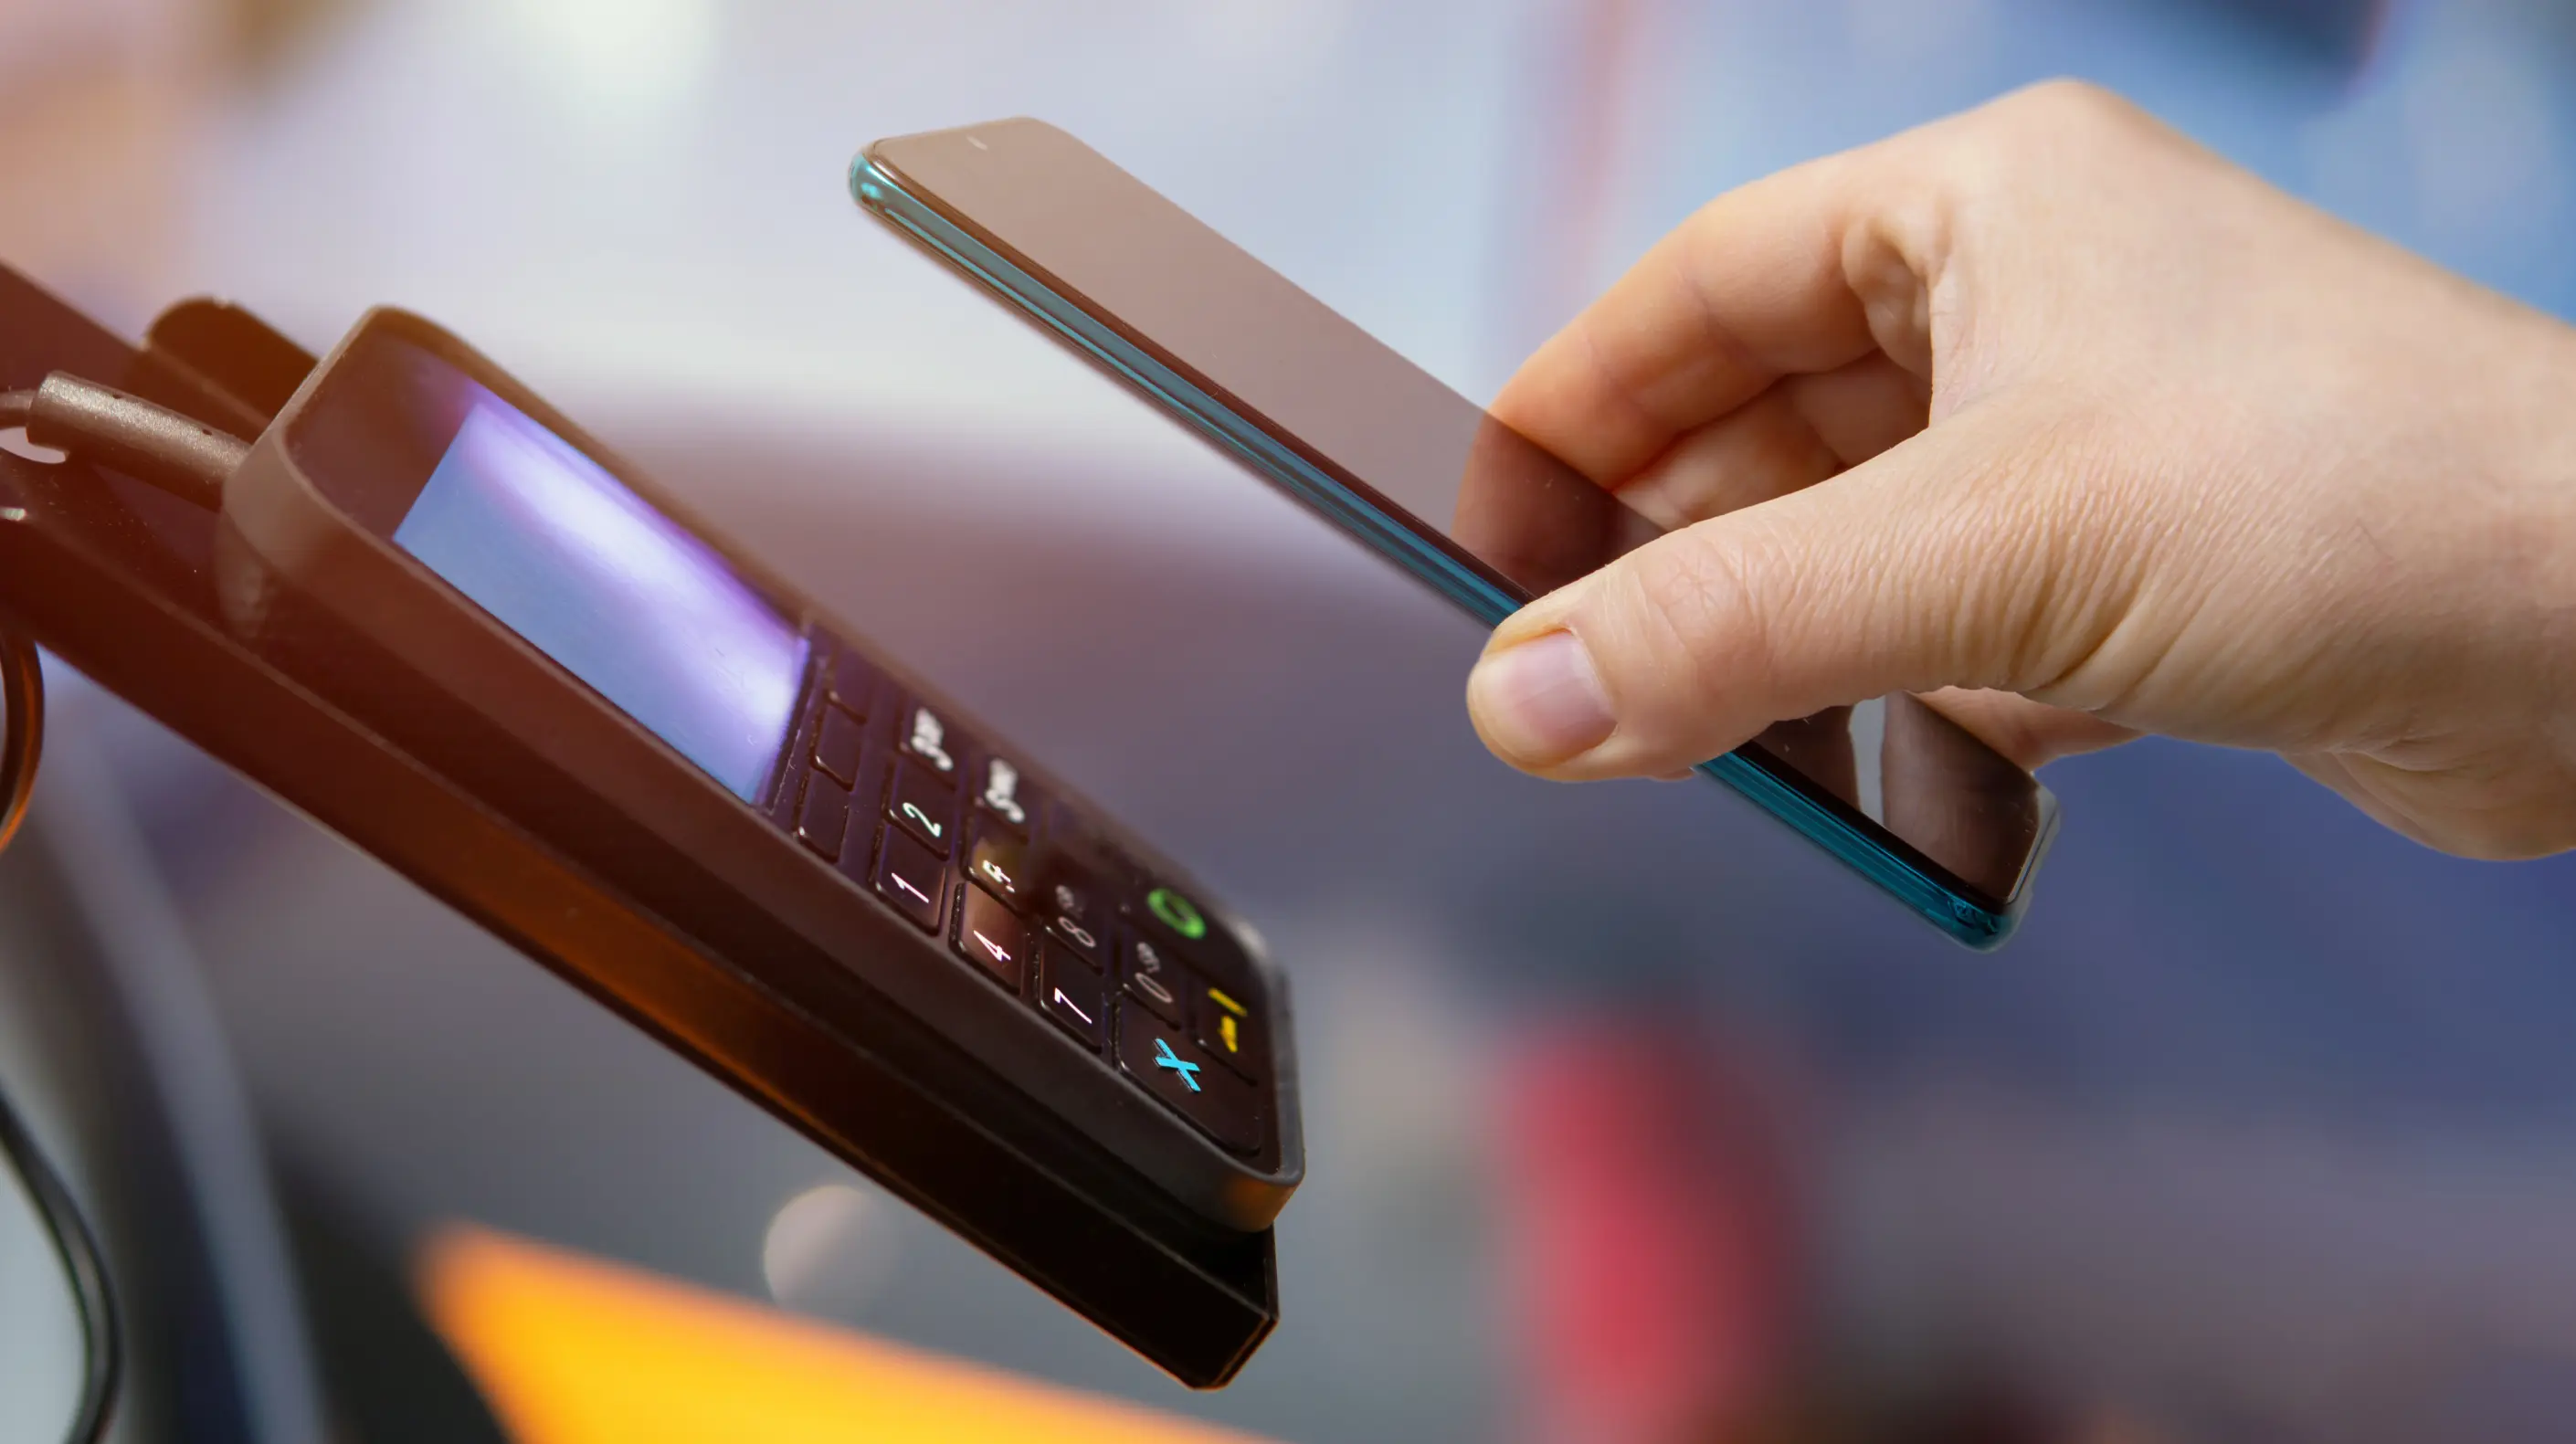 A mobile device being held over a credit card reader in a retail location.